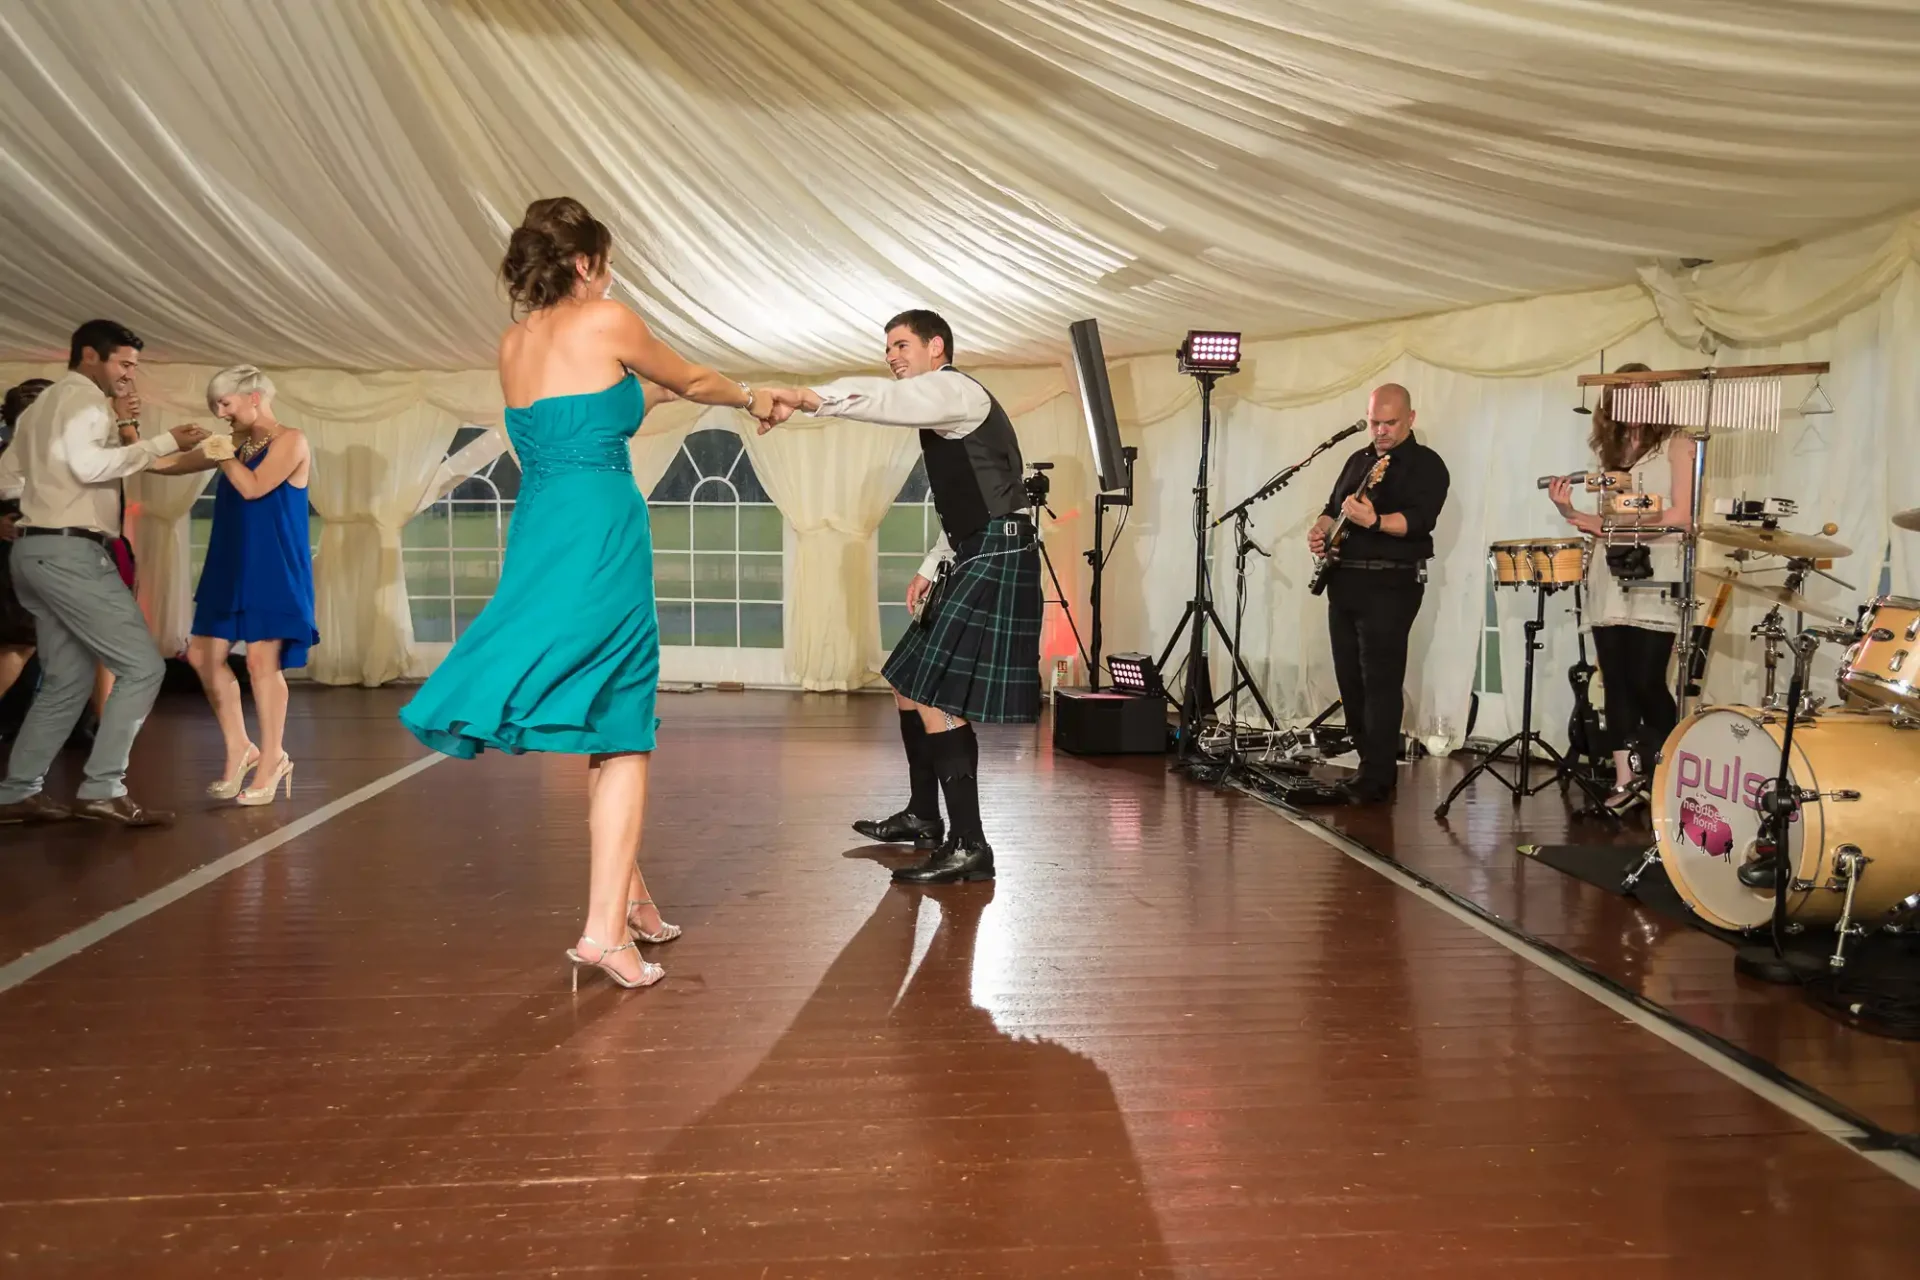 A couple dances energetically in a tent at a wedding, with the man in a kilt and the woman in a teal dress, while a band performs in the background.